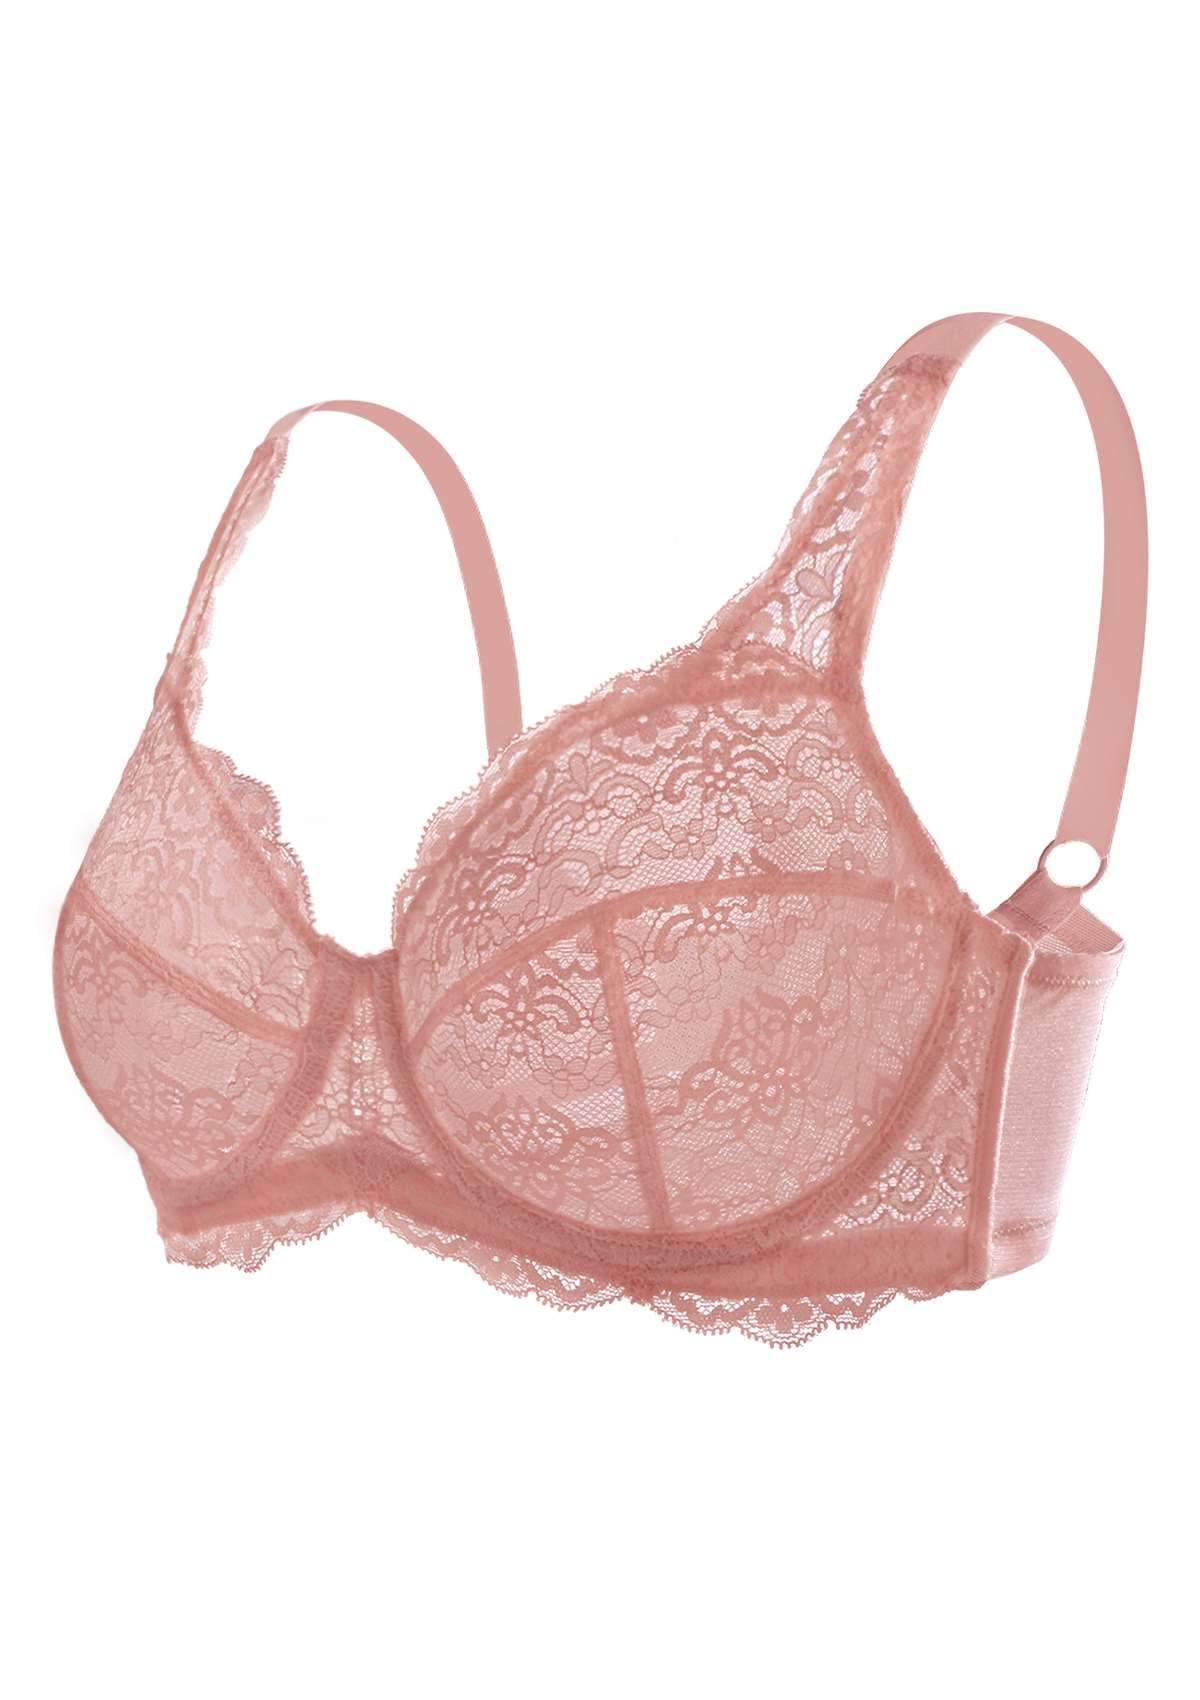 HSIA Forget Me Not Thin Bra: Wide Band Bra For Wide Set Breasts - Dusty Peach / 42 / DDD/F